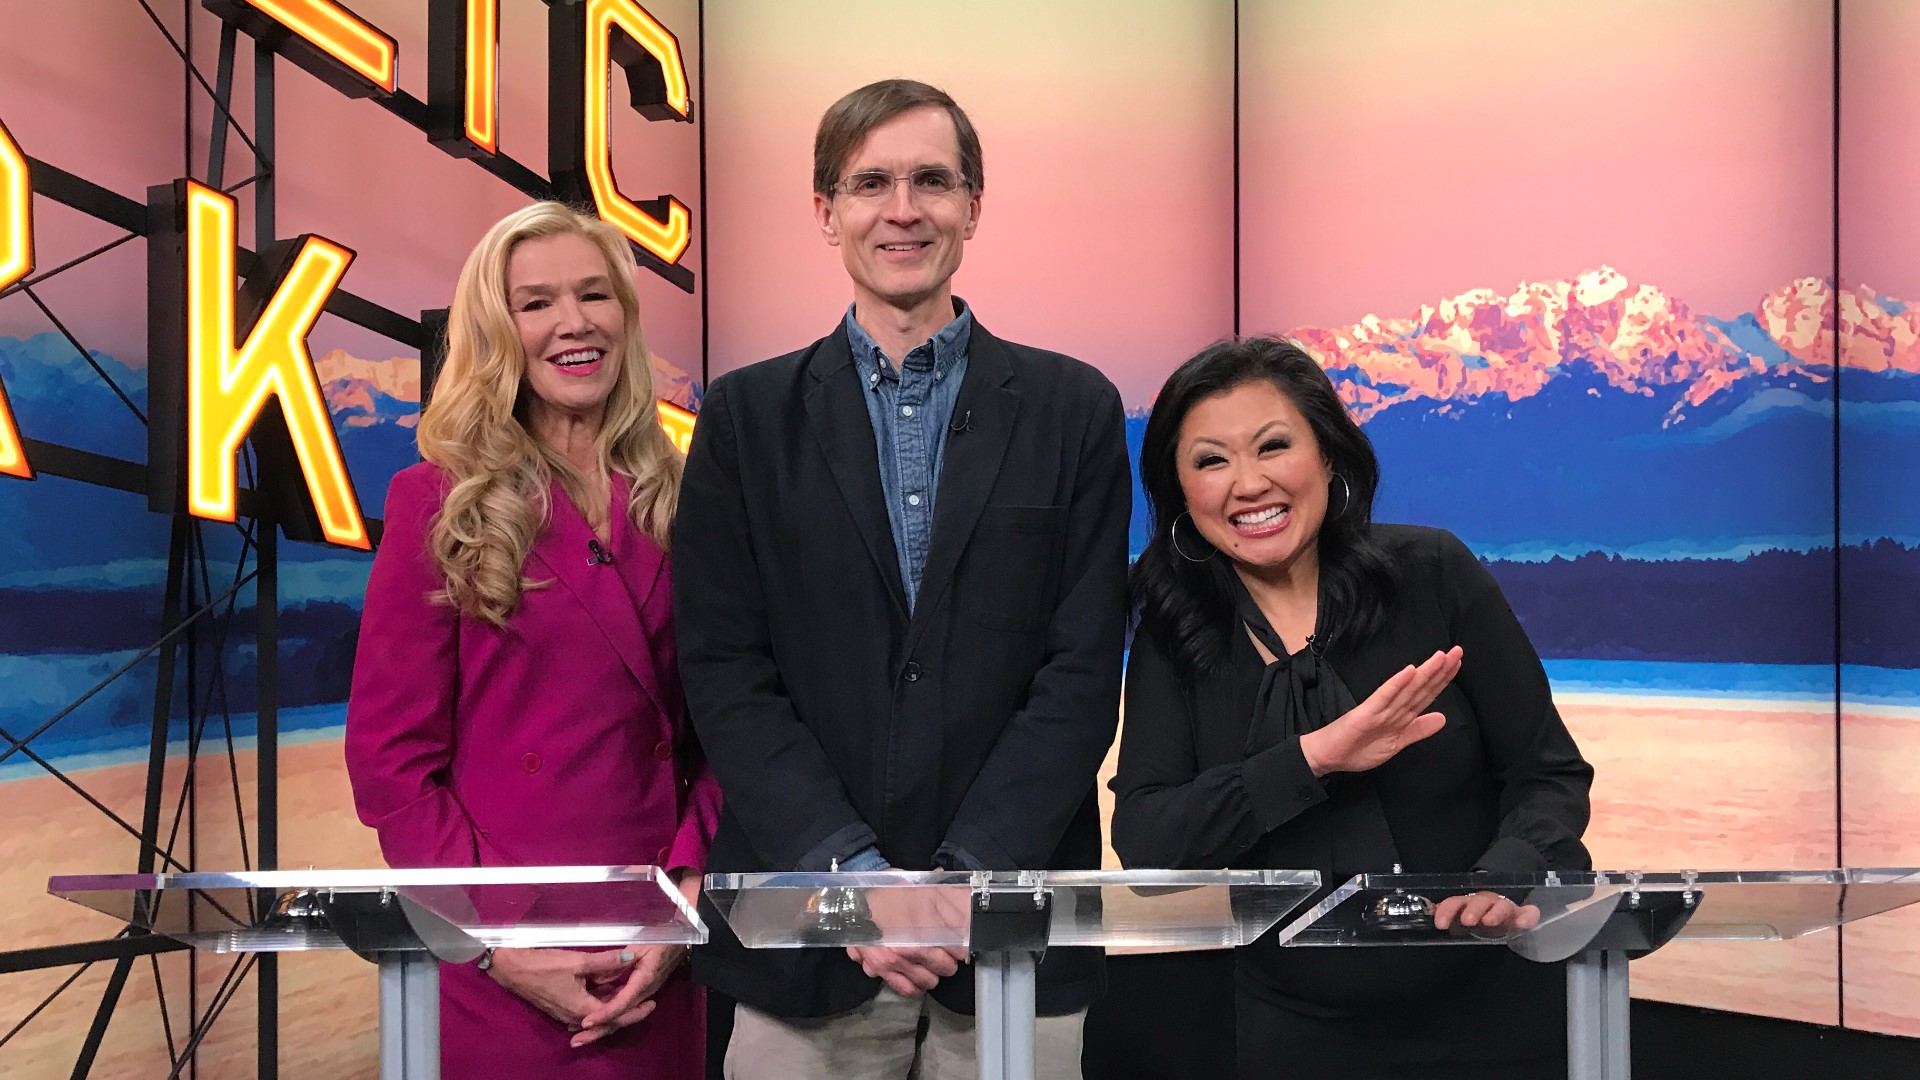 Do you know more than Attorney Anne Bremner, Historian Feliks Banel, or TV News Anchor Michelle Li? Let's find out!